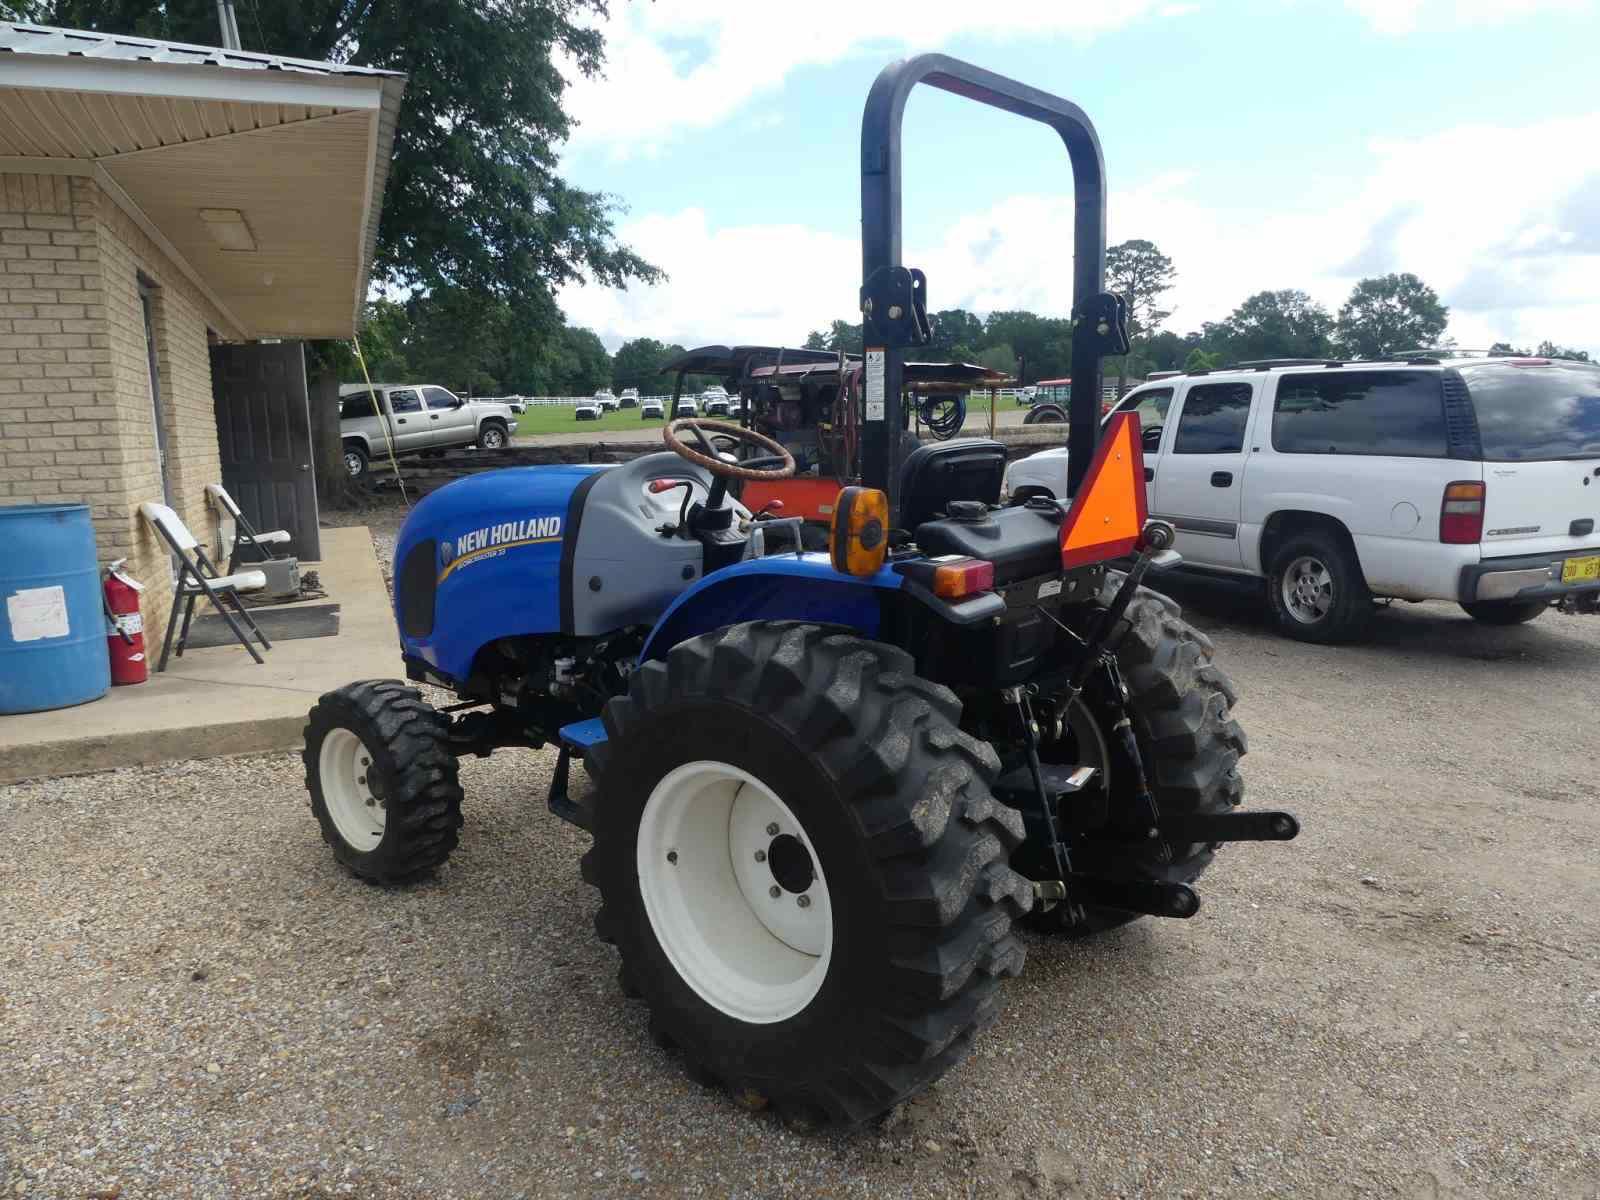 2015 New Holland Workmaster 33 MFWD Tractor, s/n 2270001690: Meter Shows 35